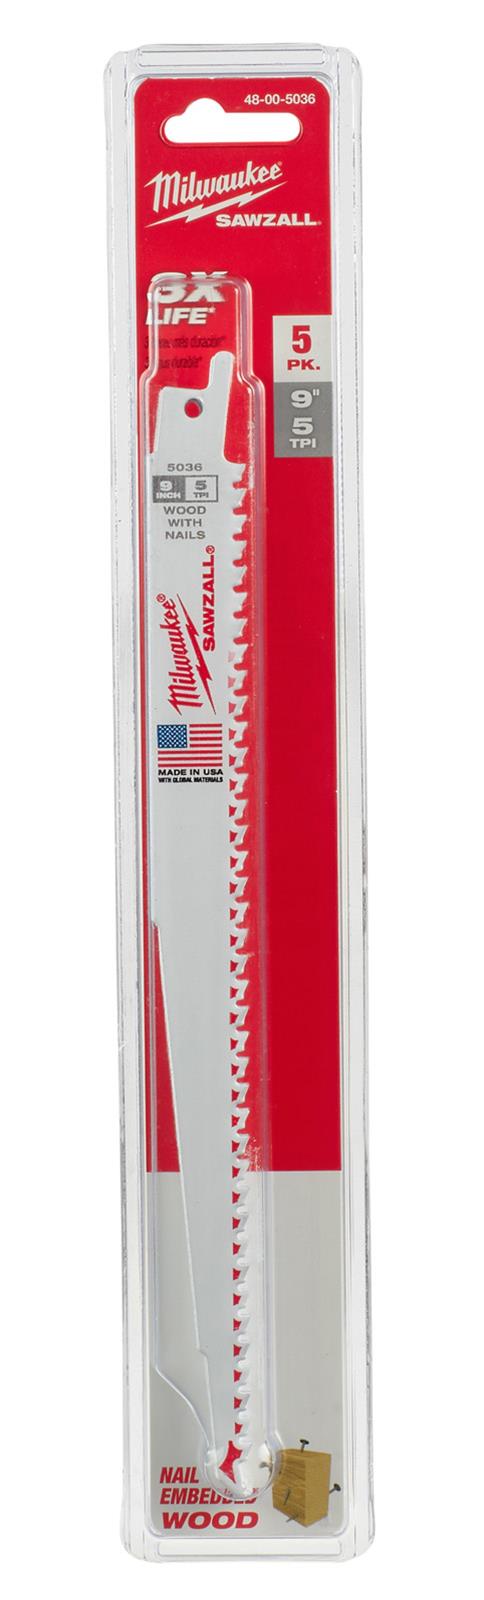 MILWAUKEE 48-00-5036 9" 5-TPI SAWZALL BLADES FOR WOOD PACK OF 5 